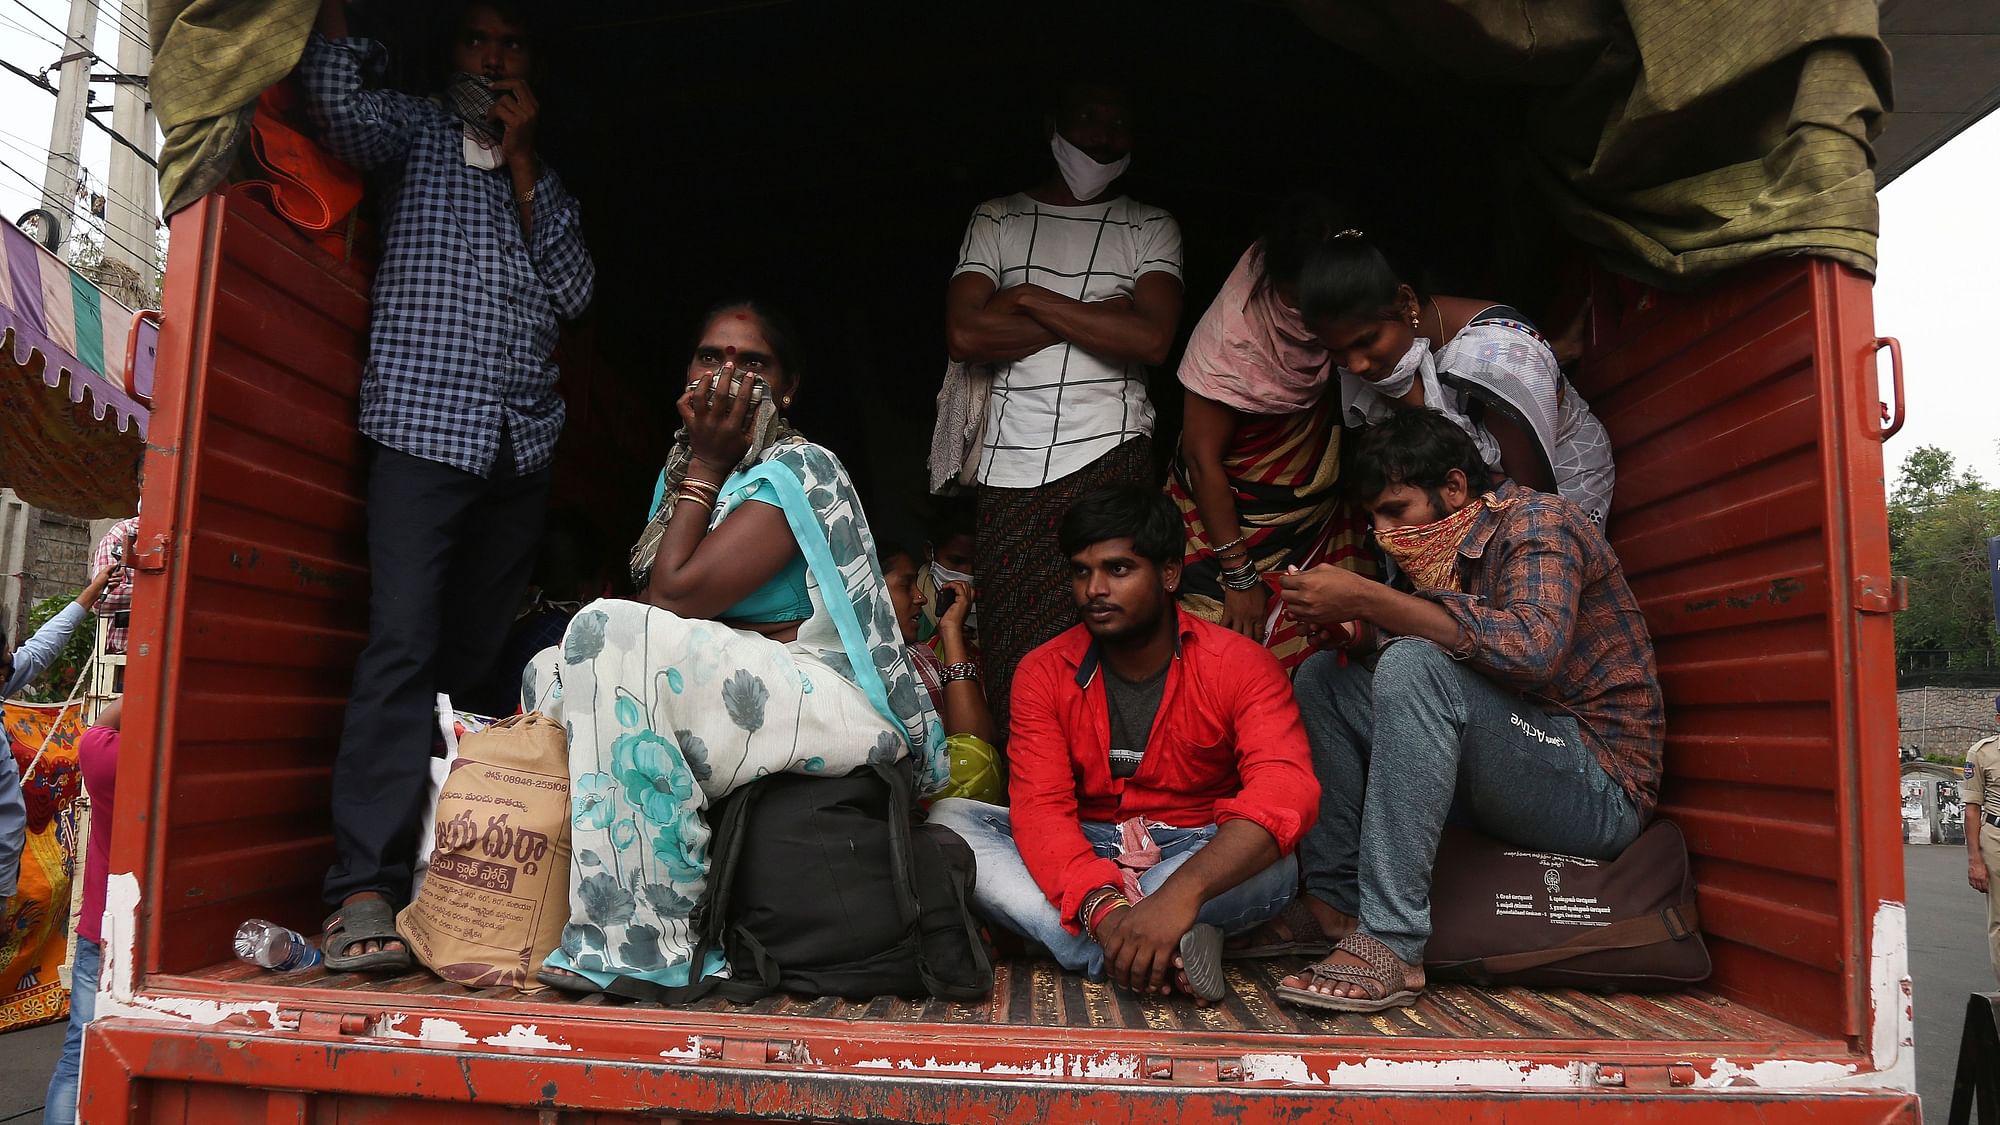 Indian migrants from Andhra Pradesh state, who were stopped while attempting to return to their native villages on foot, sit in a truck to be moved to a government facility during lockdown.